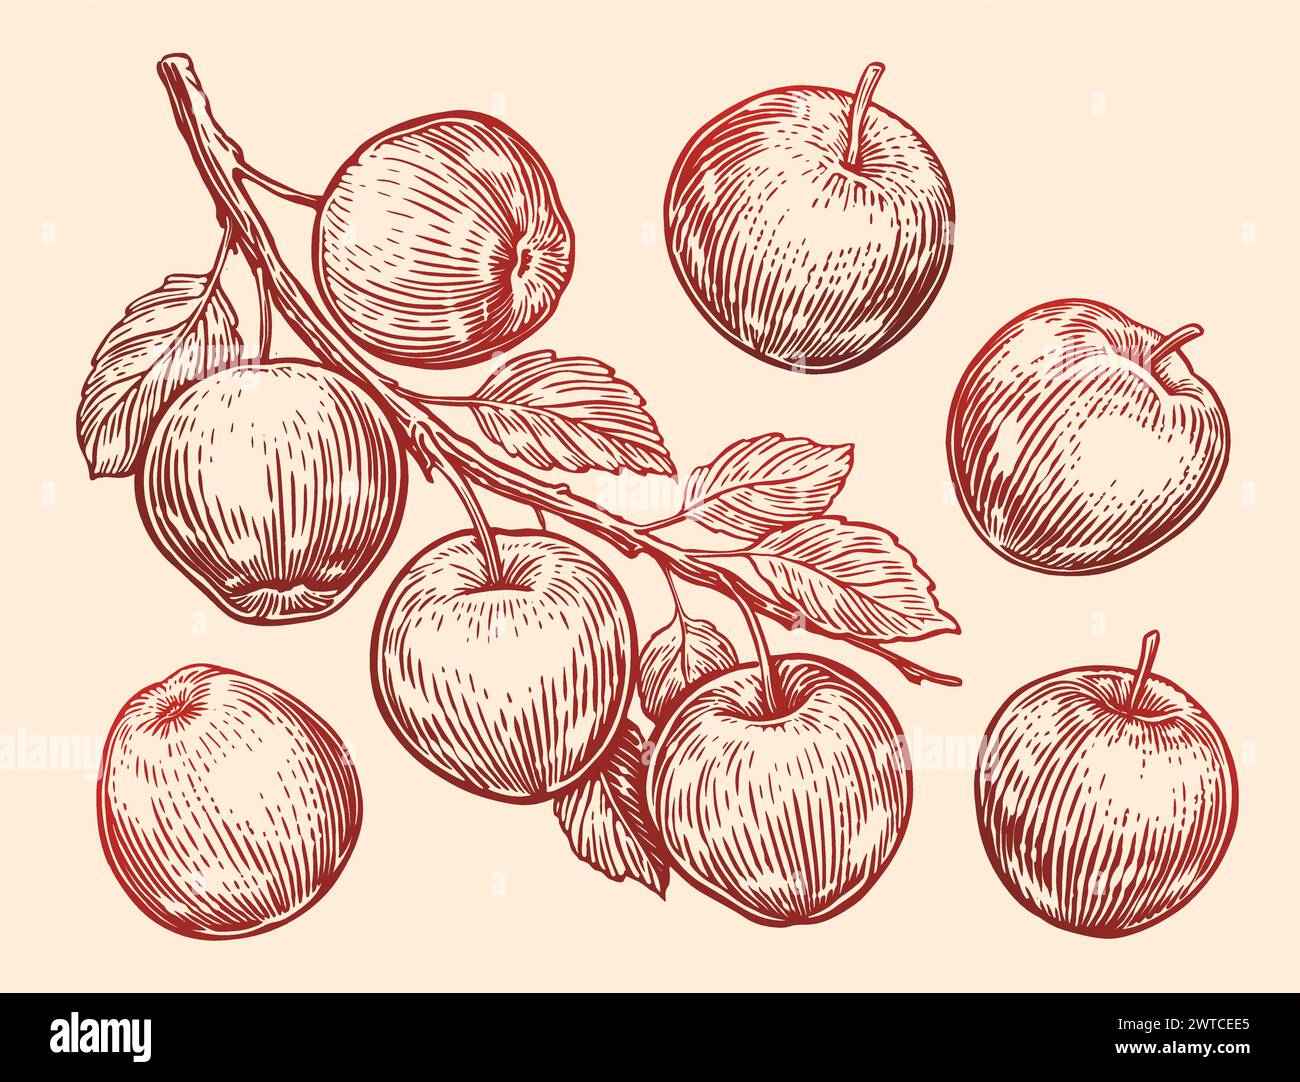 Hand drawn Apples with leaves on branch. Fruit sketch vector illustration. Vintage style engraving Stock Vector